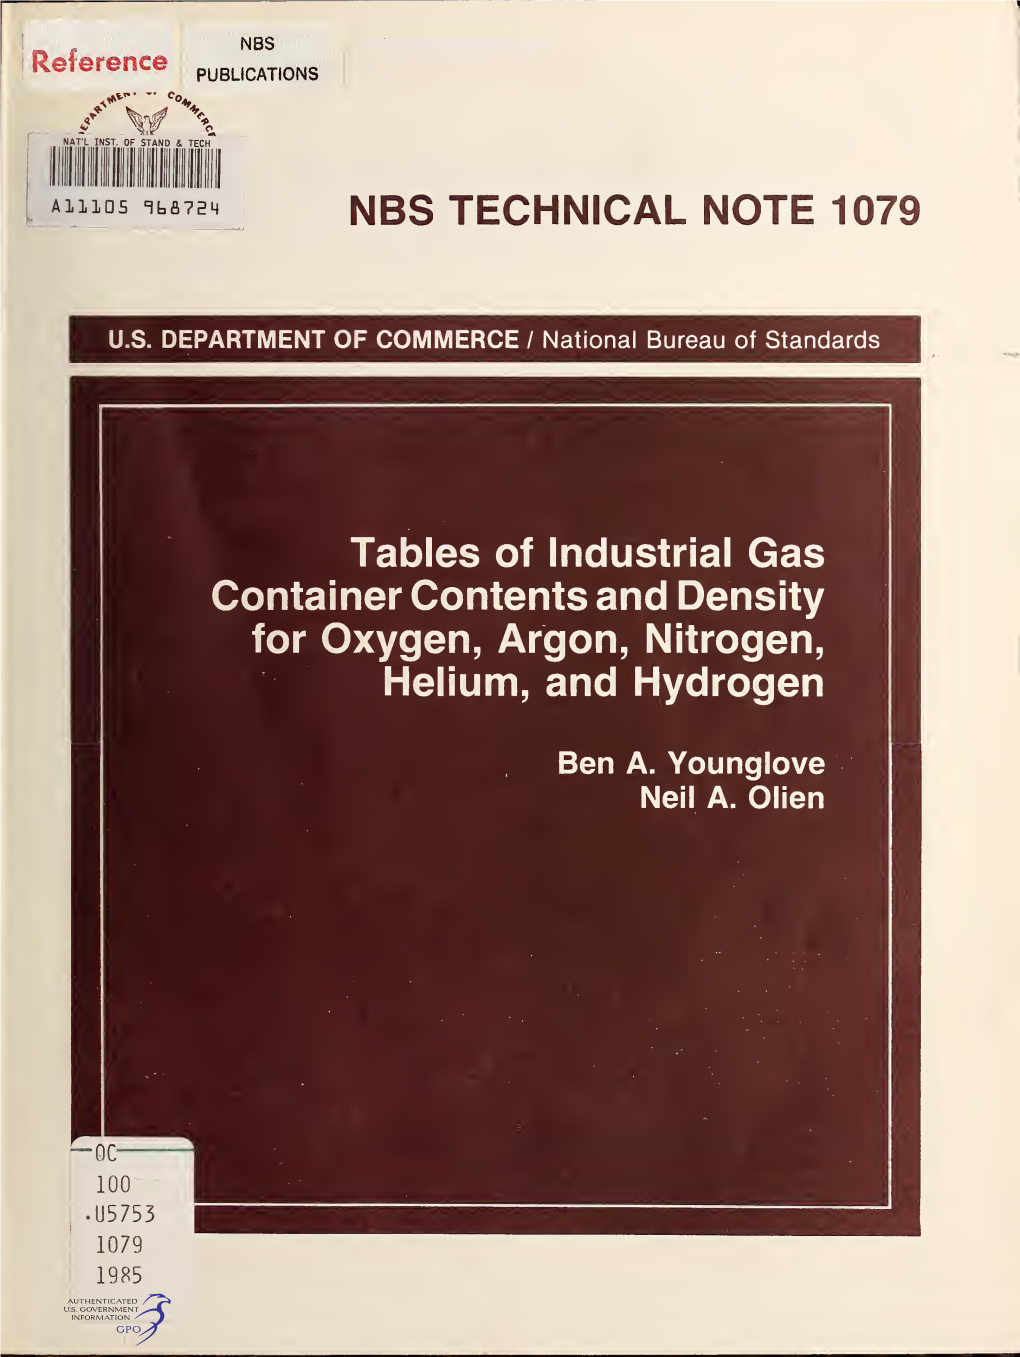 Tables of Industrial Gas Container Contents and Density for Oxygen, Argon, Nitrogen, Helium, and Hydrogen